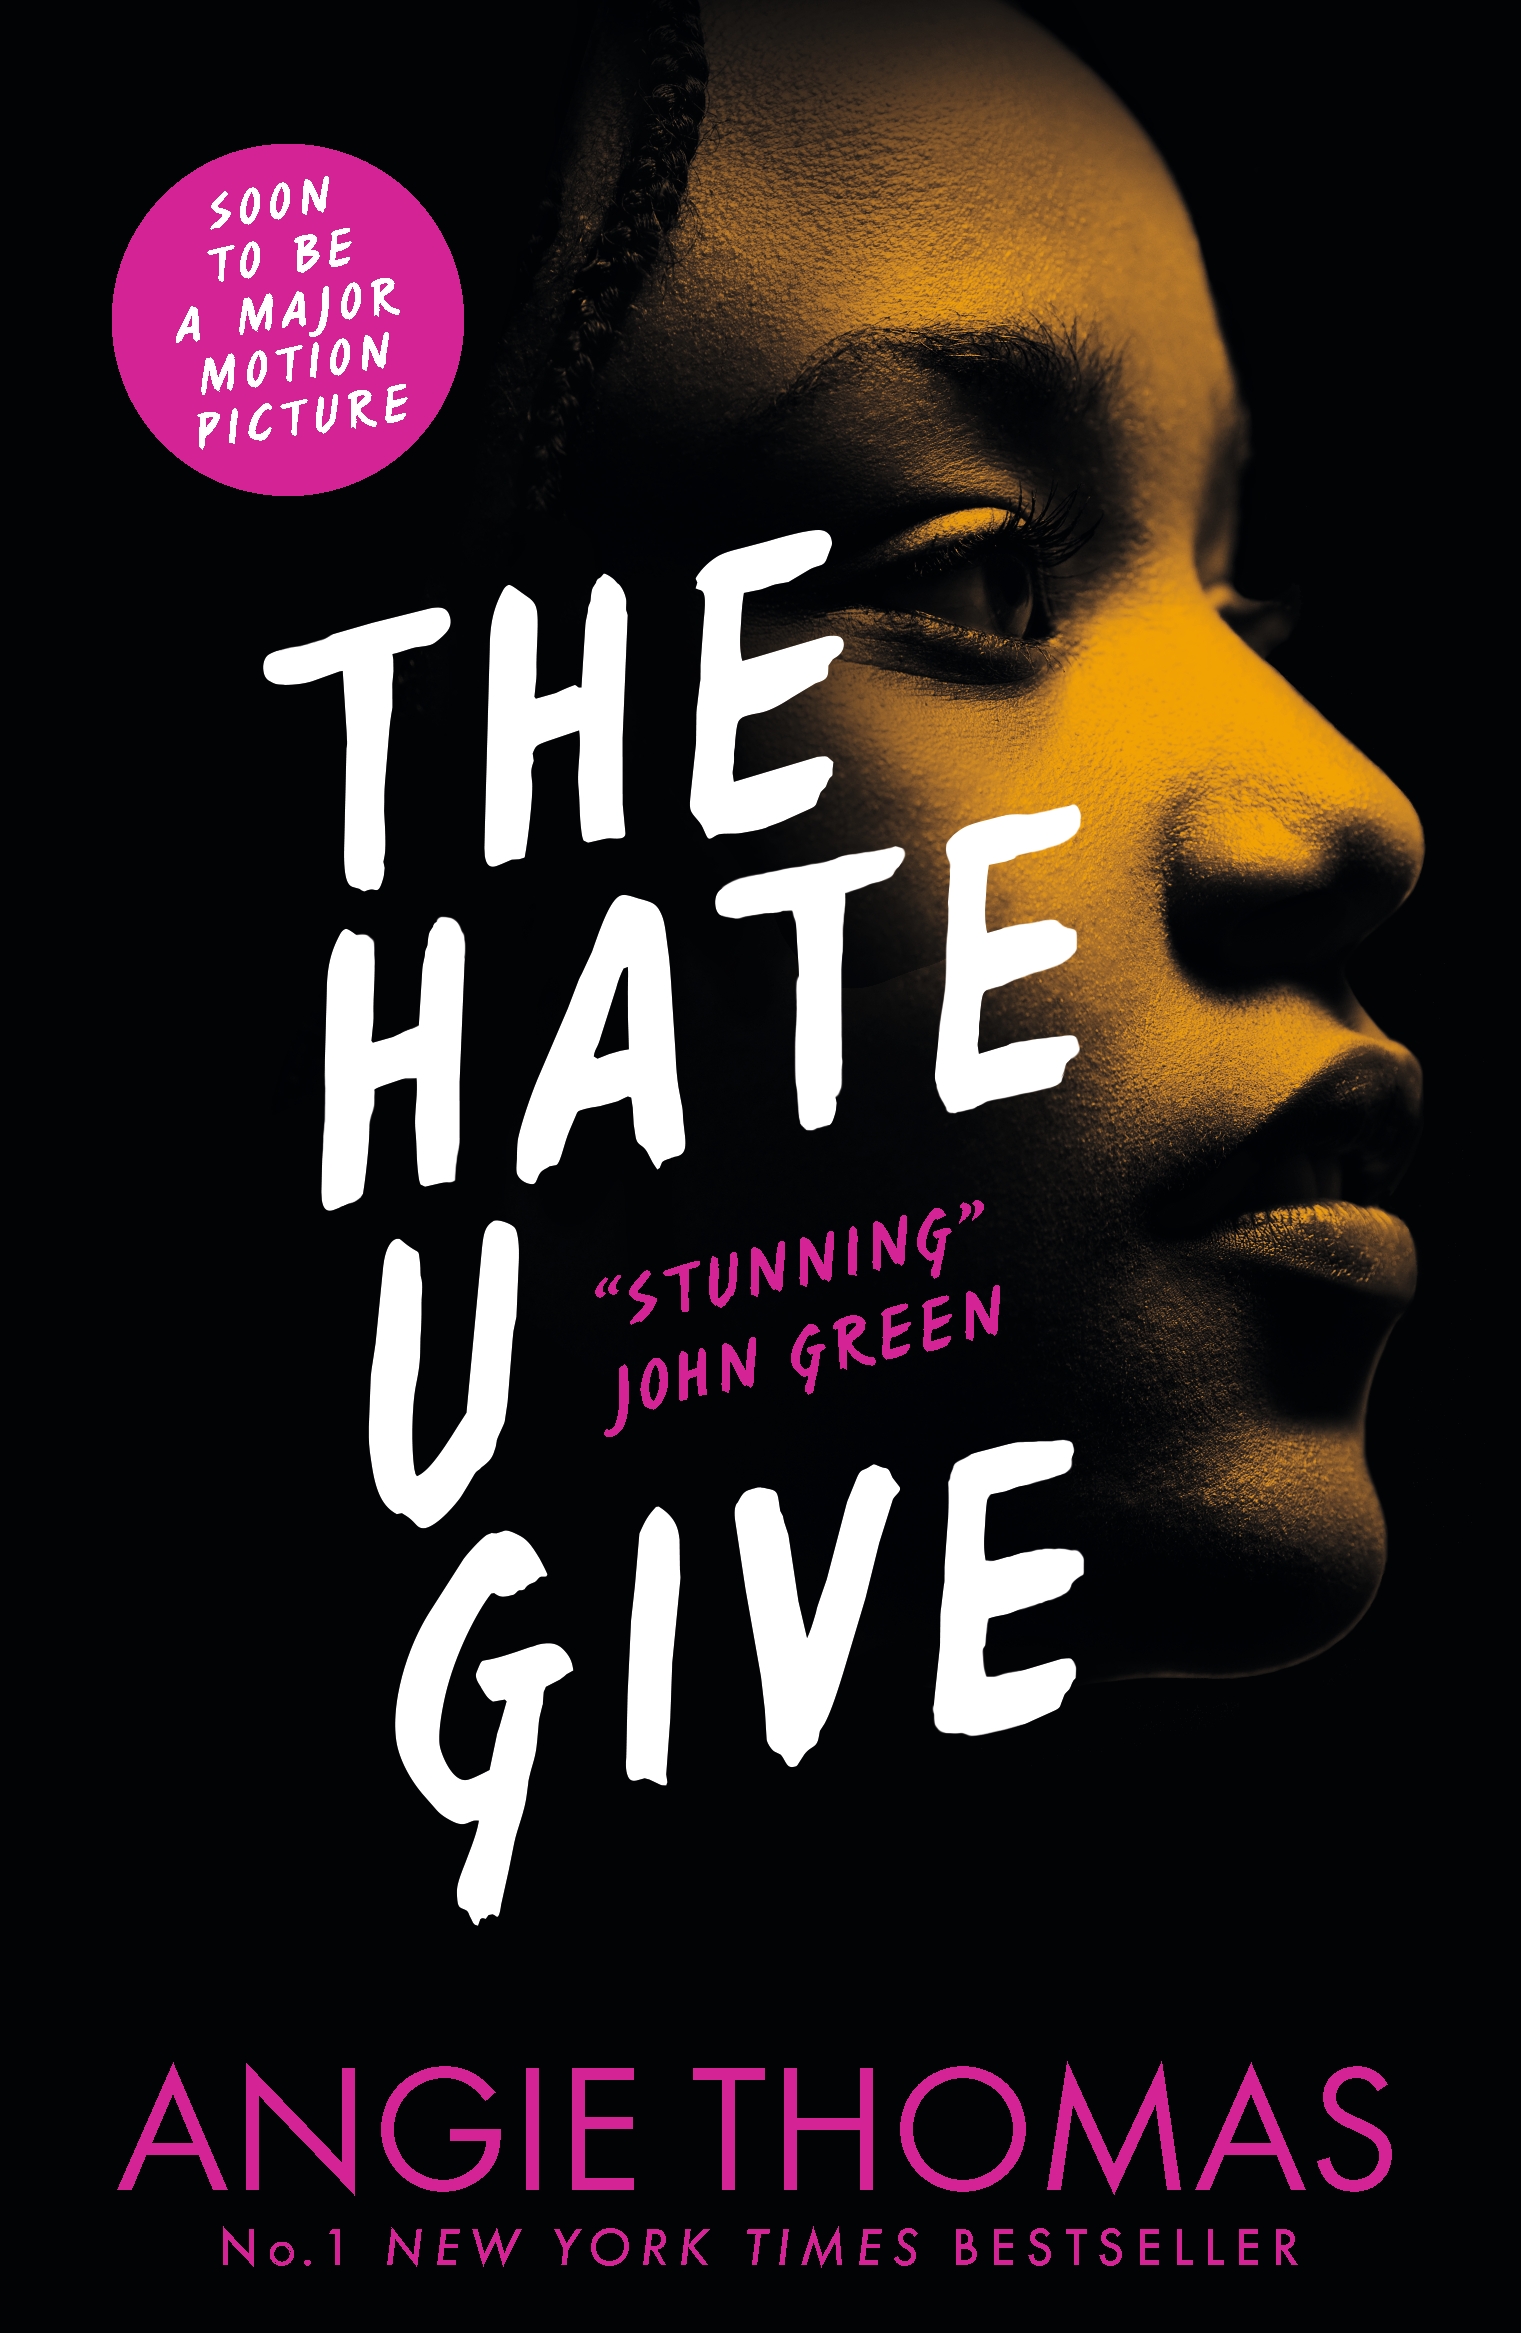 The Hate You Give (Angie Thomas)